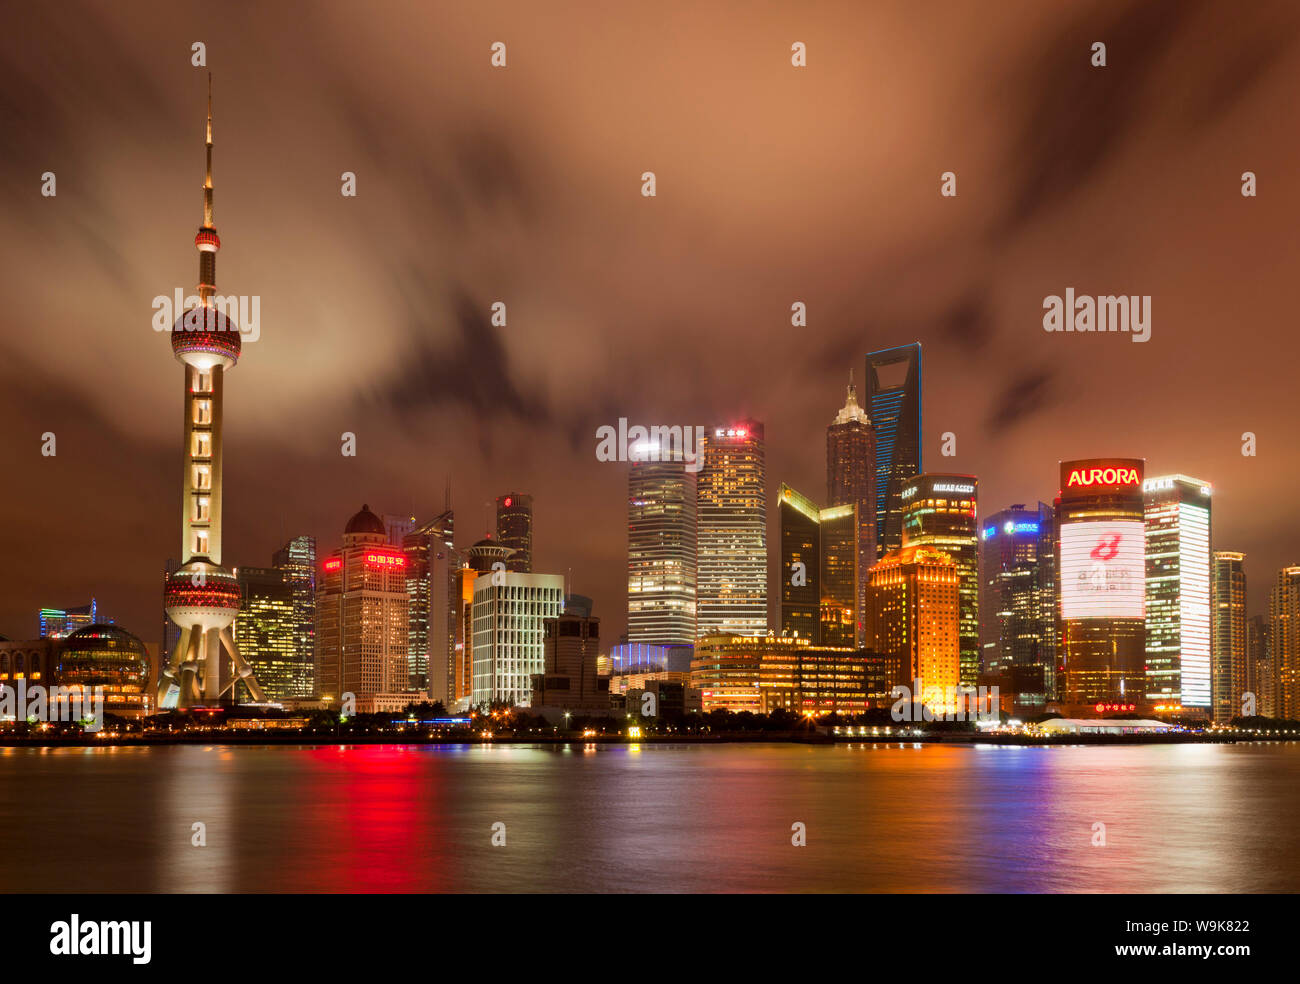 City skyline at night with Oriental Pearl Tower and Pudong skyscrapers across the Huangpu River, Shanghai, China, Asia Stock Photo